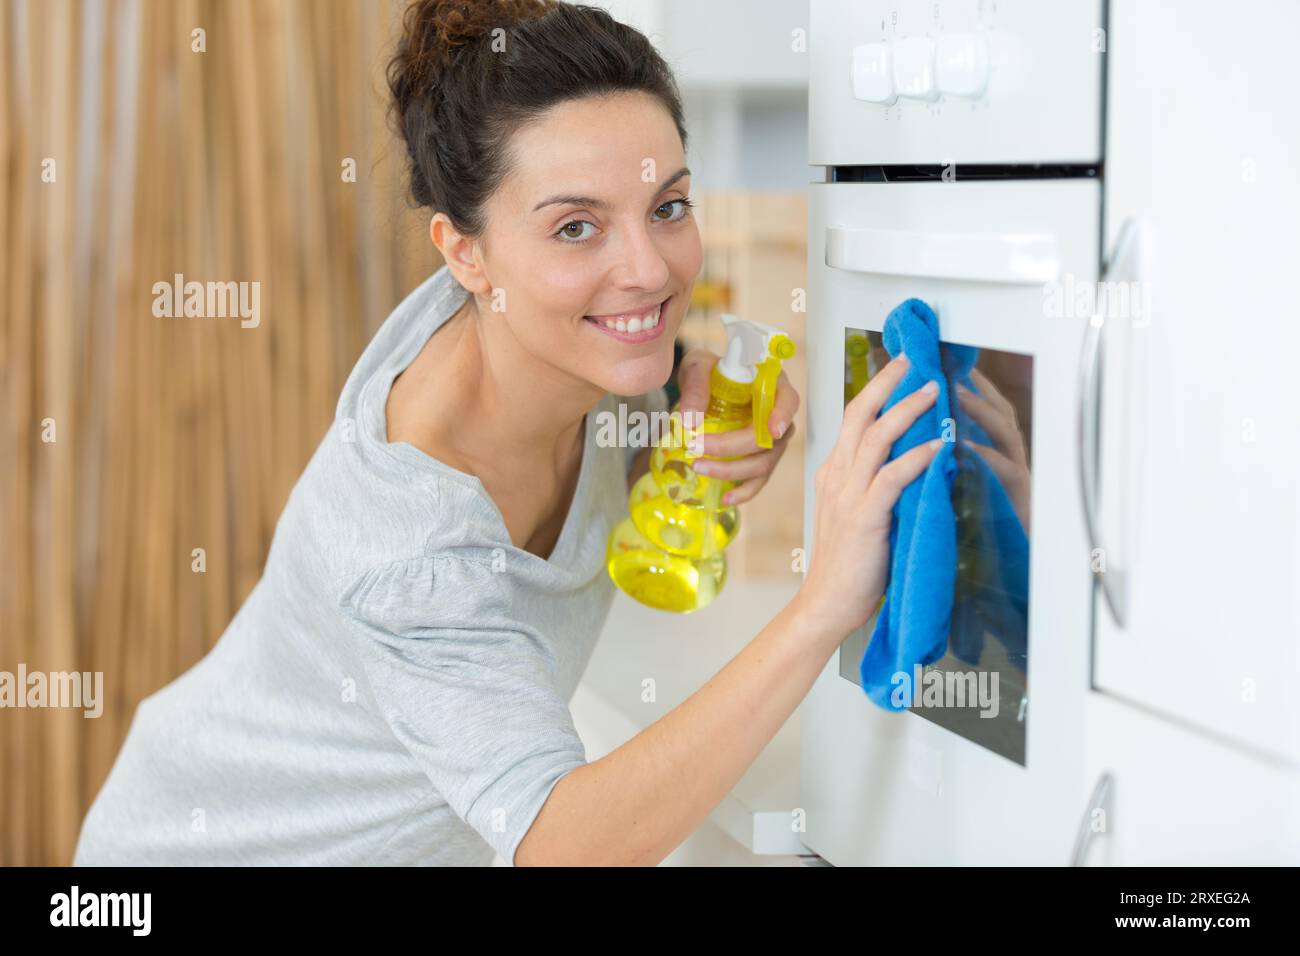 young woman cleaning the oven Stock Photo